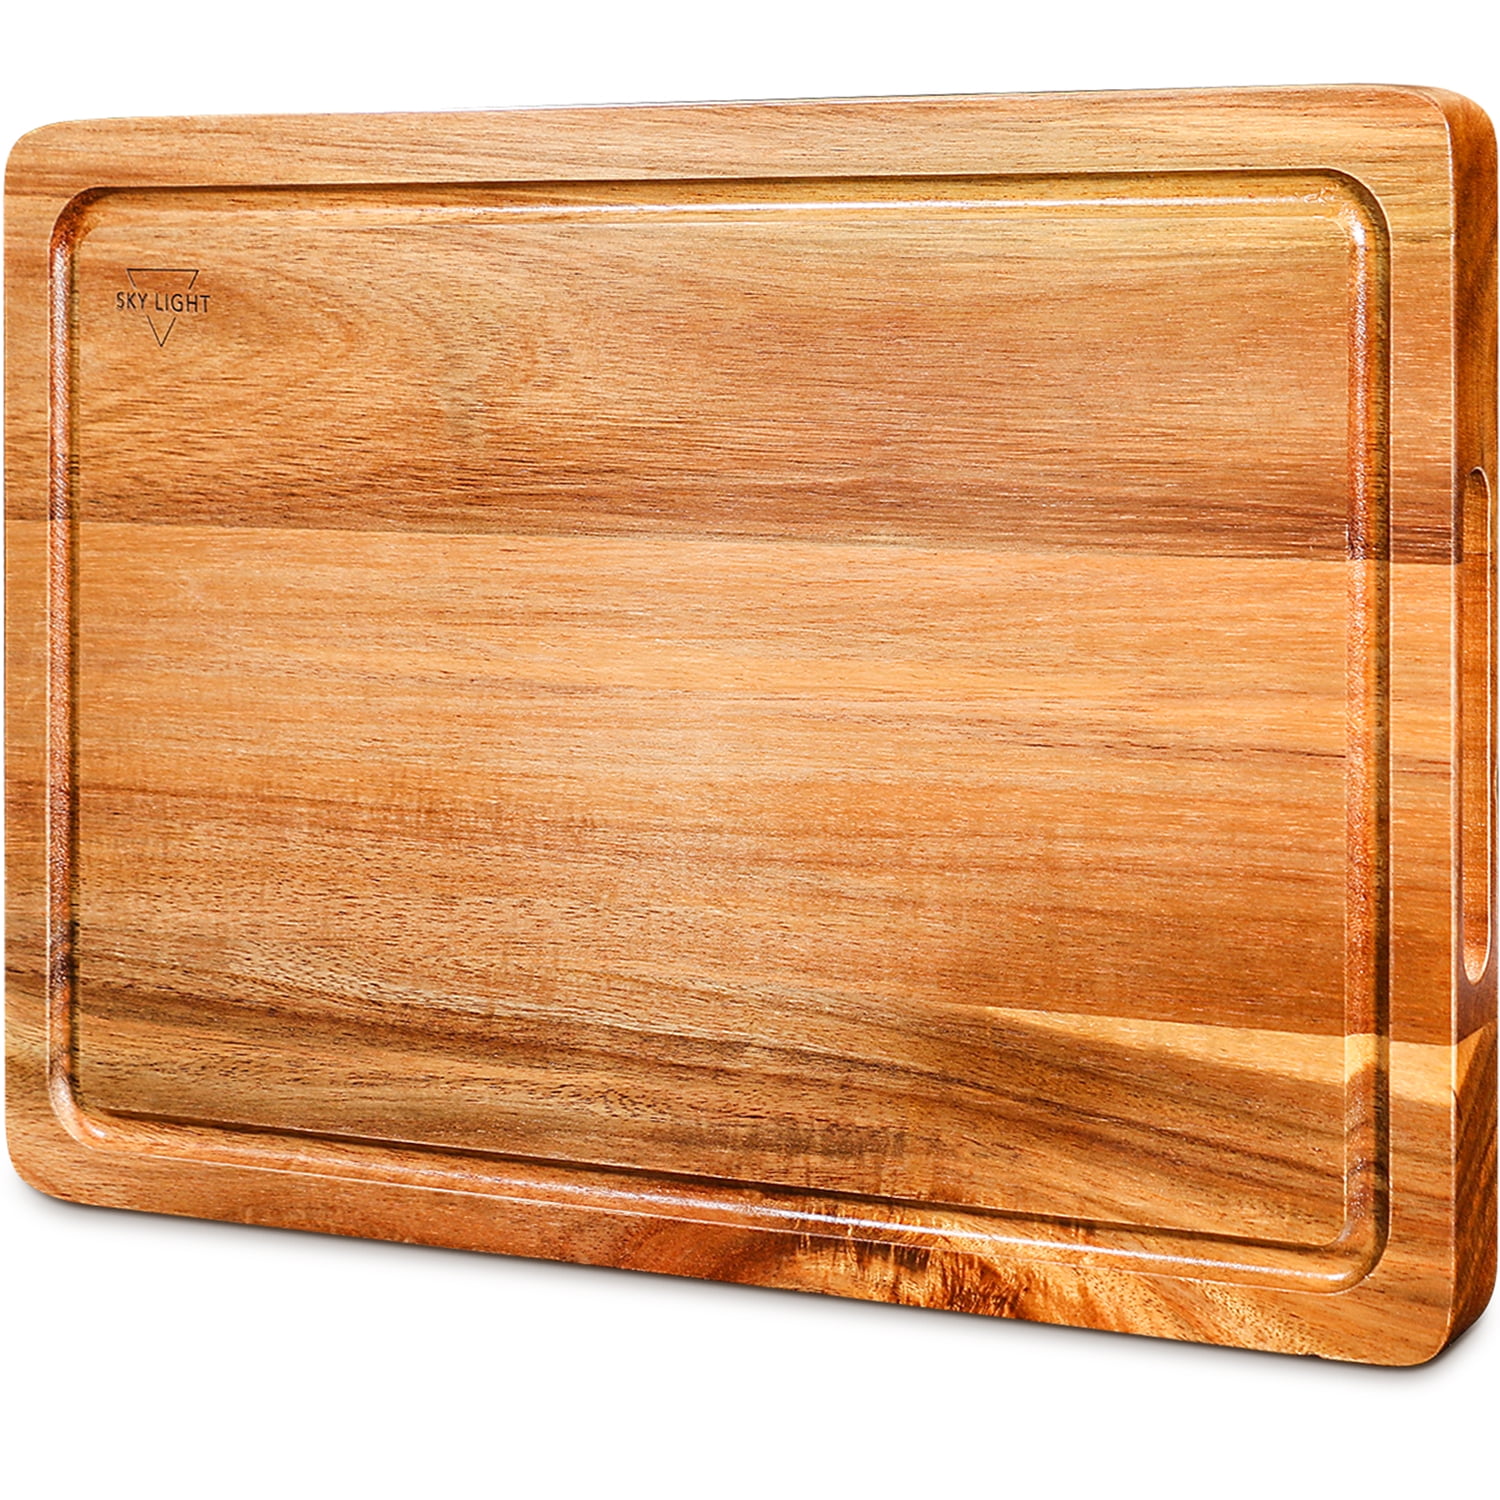 SKY LIGHT Bamboo Cutting Board Set of 3, Chopping Boards Set for Kitchen -  Pre-Oiled Wood Serving Charcuterie Tray with Juice Groove 